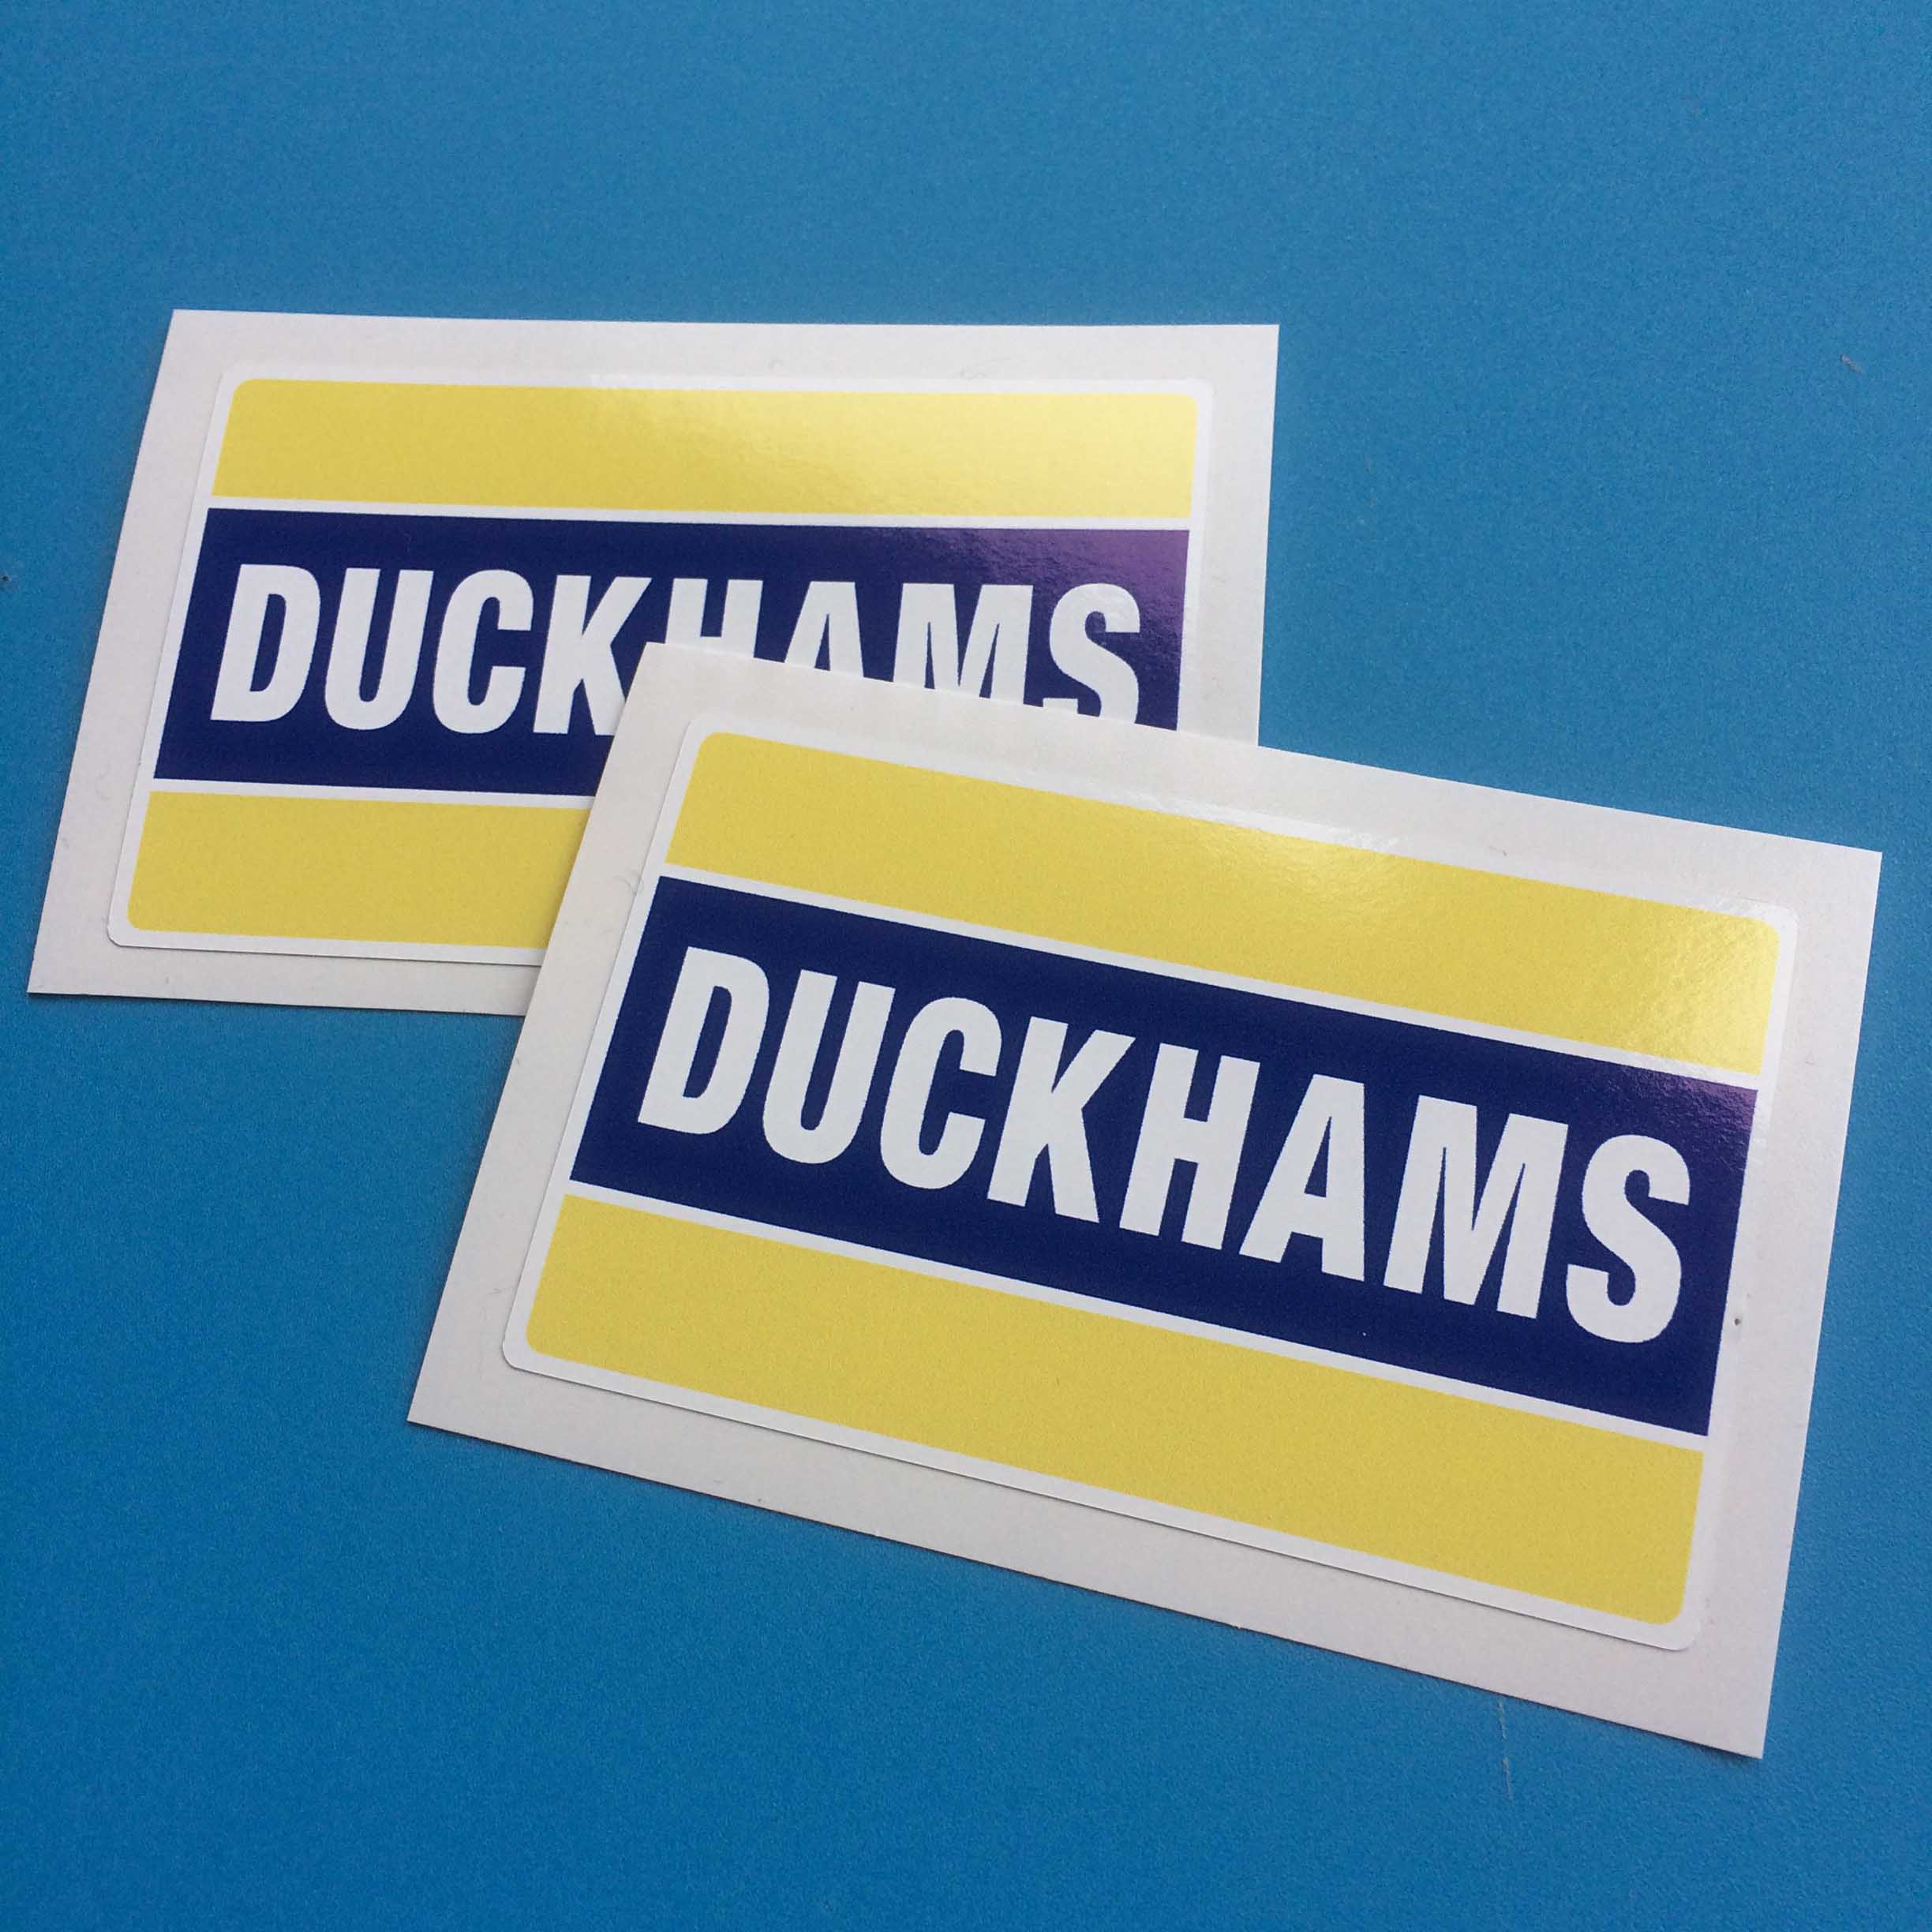 Duckhams in white capital letters on blue across the centre. The area above and below is yellow.